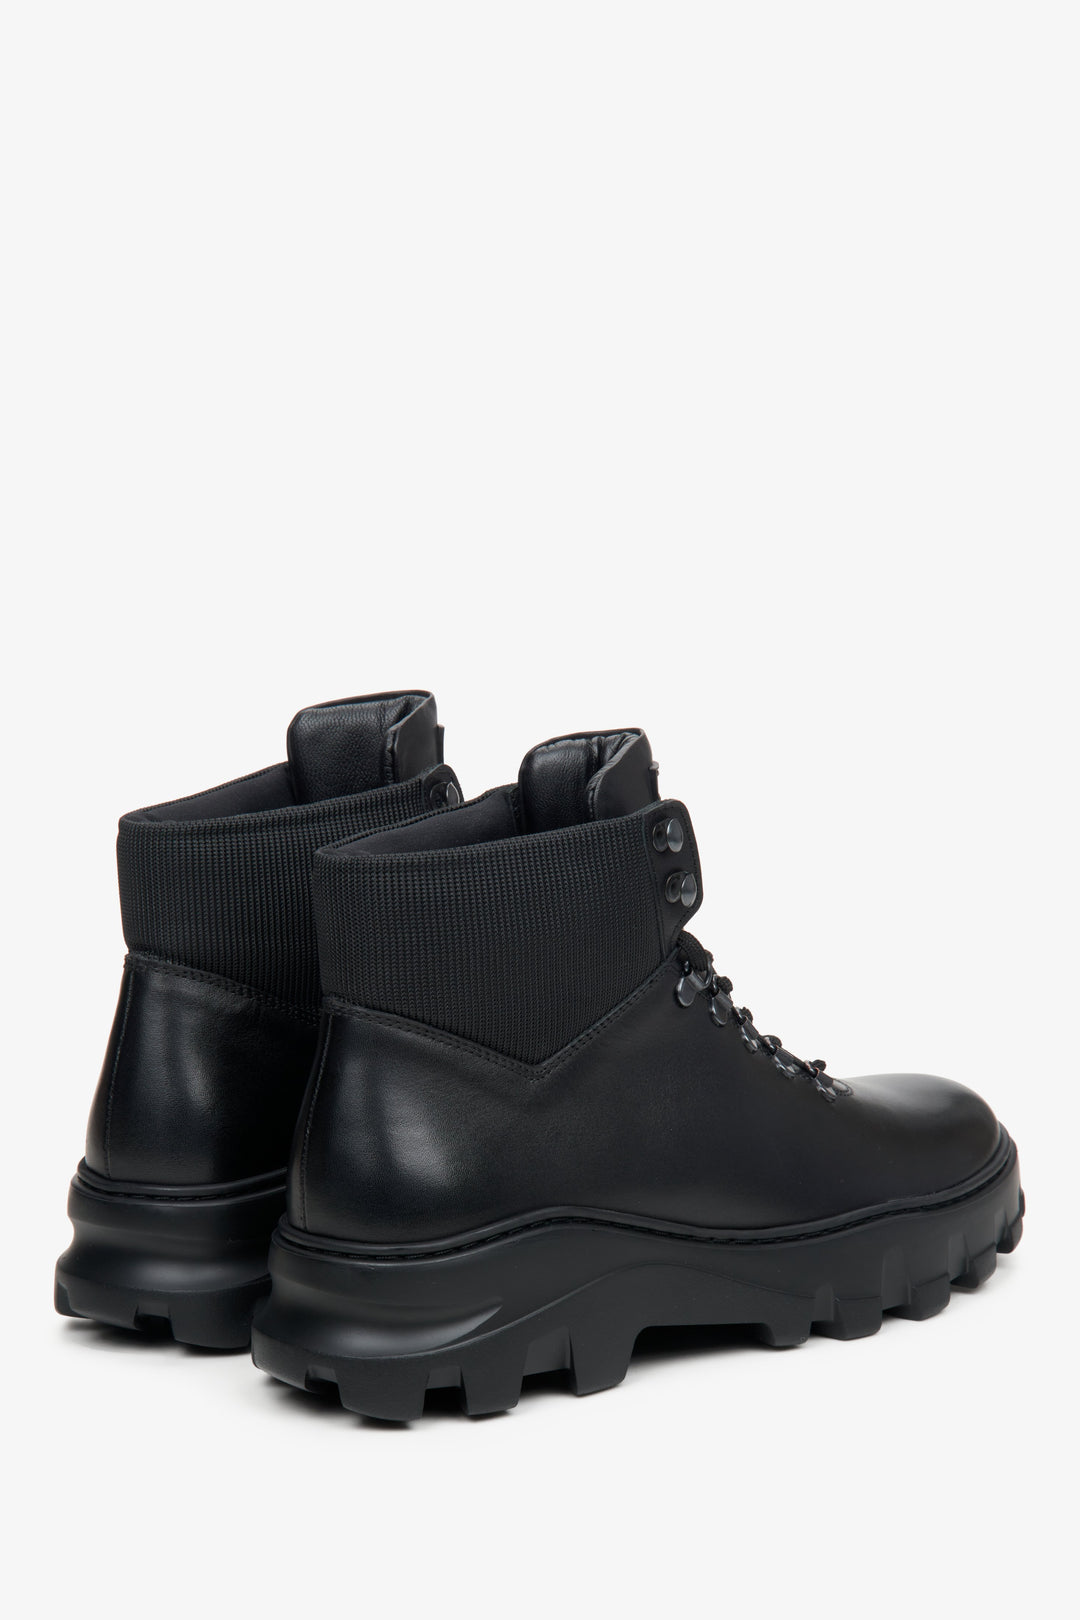 Men's black leather Estro boots - close-up on the heel and side line of the boot.